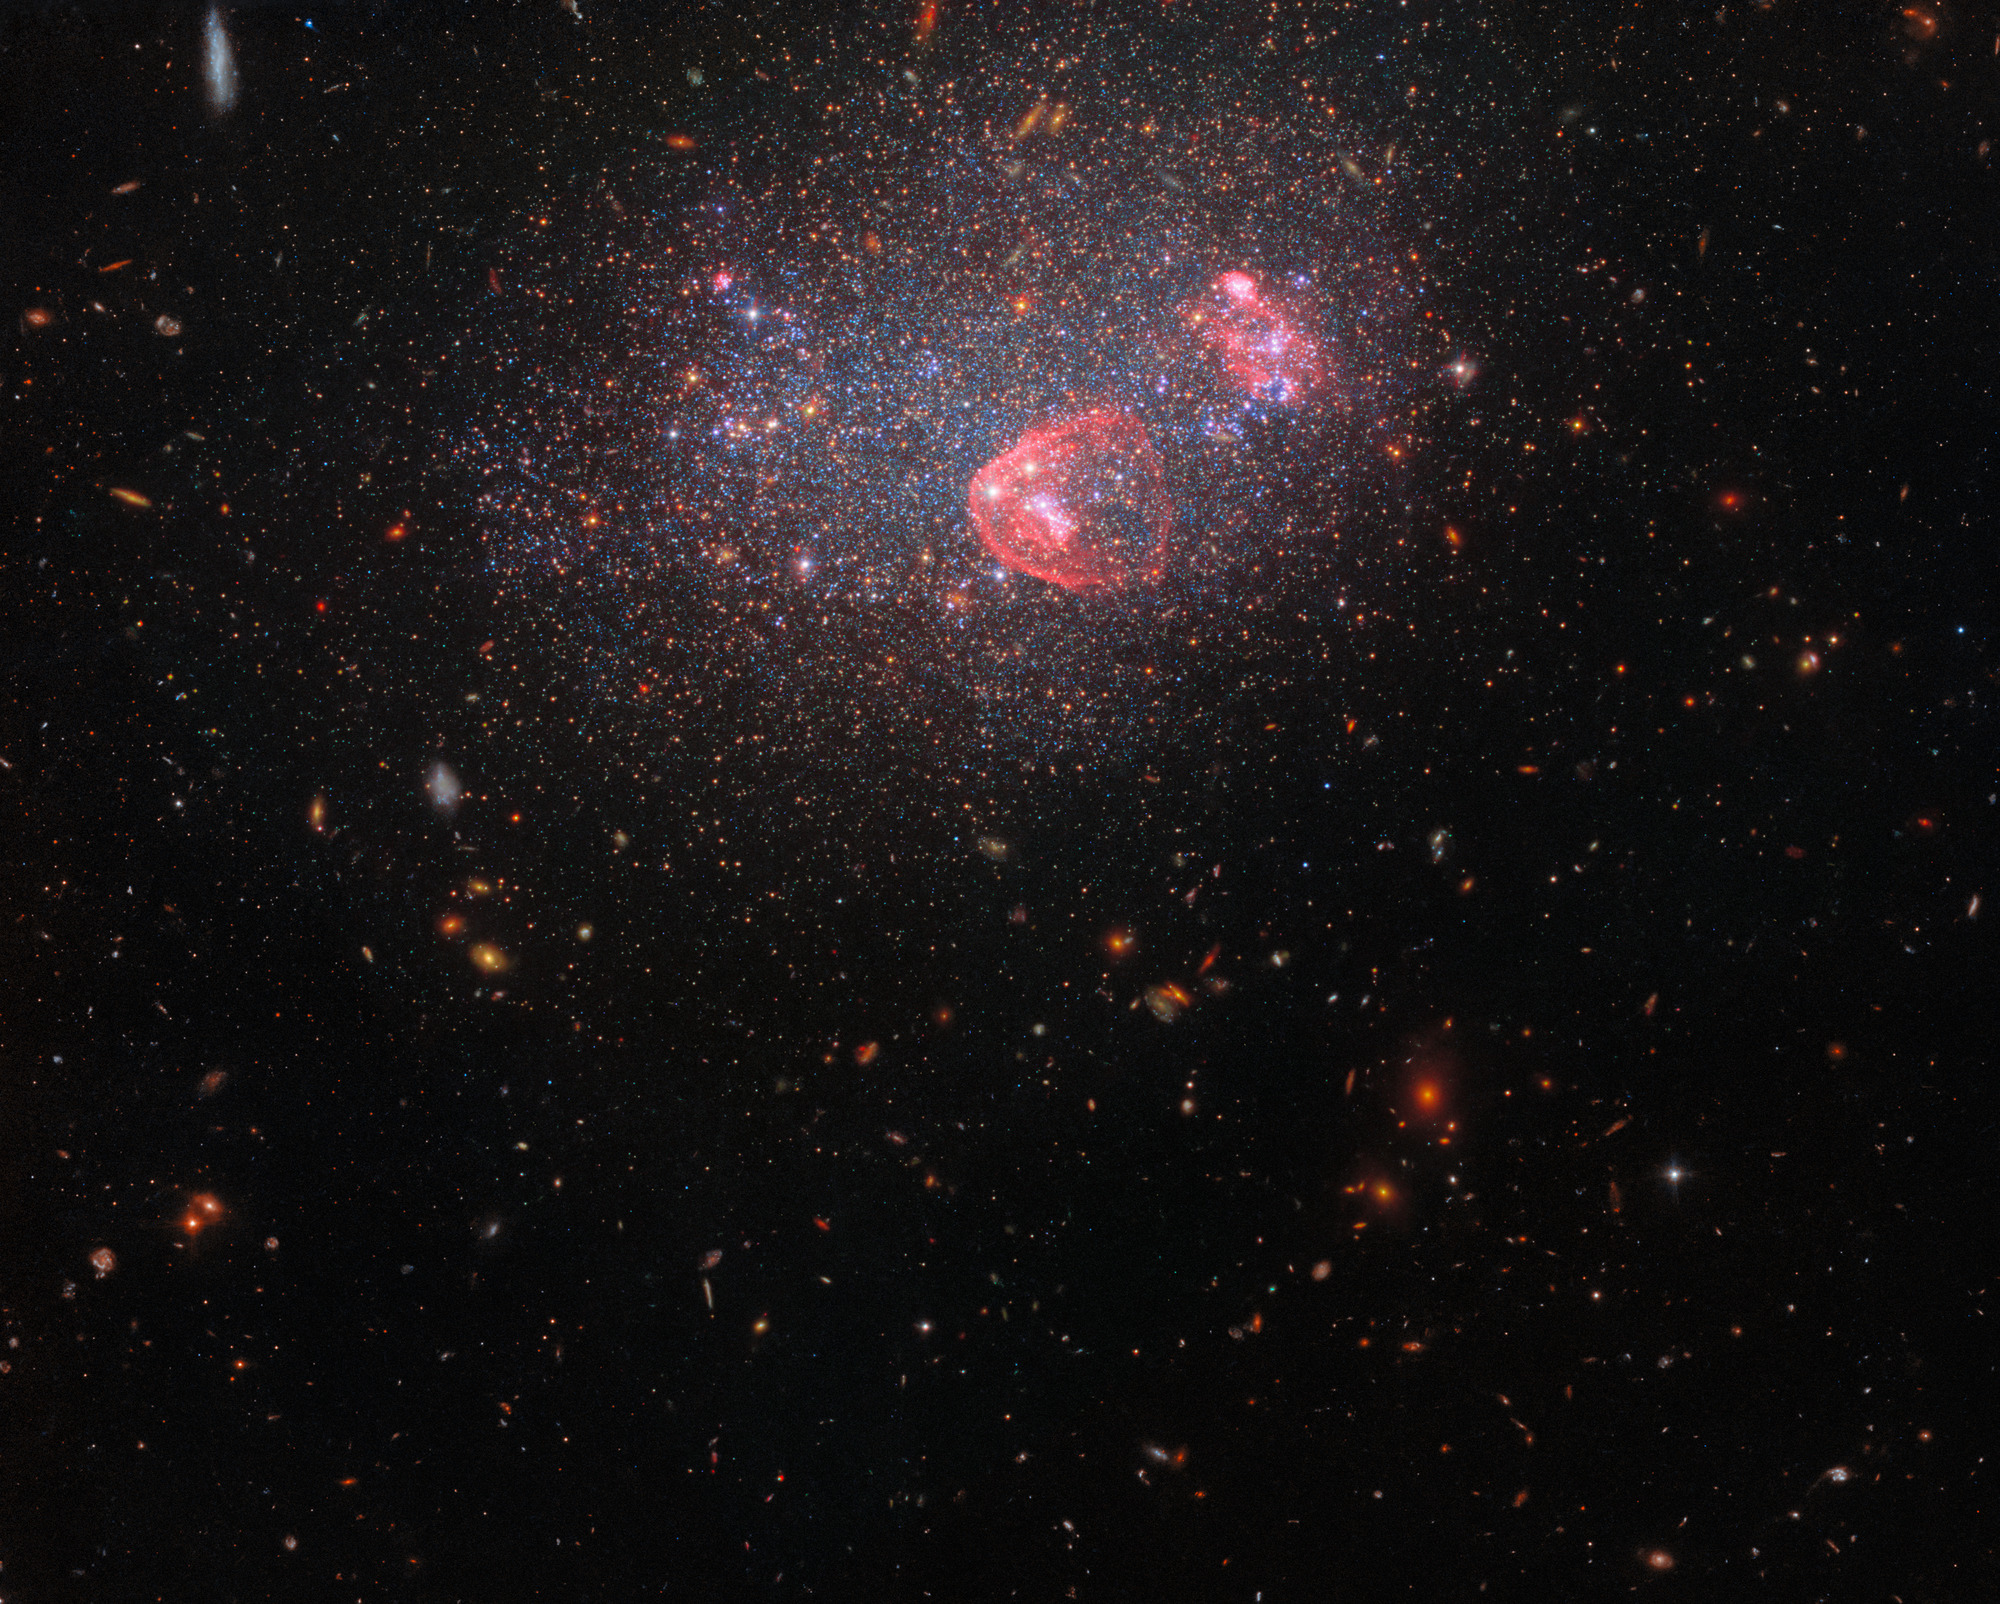 A field of galaxies. UGC 8091 is at the top and center of the image. It appears as a haze of stars through which more distant galaxies are visible. Two